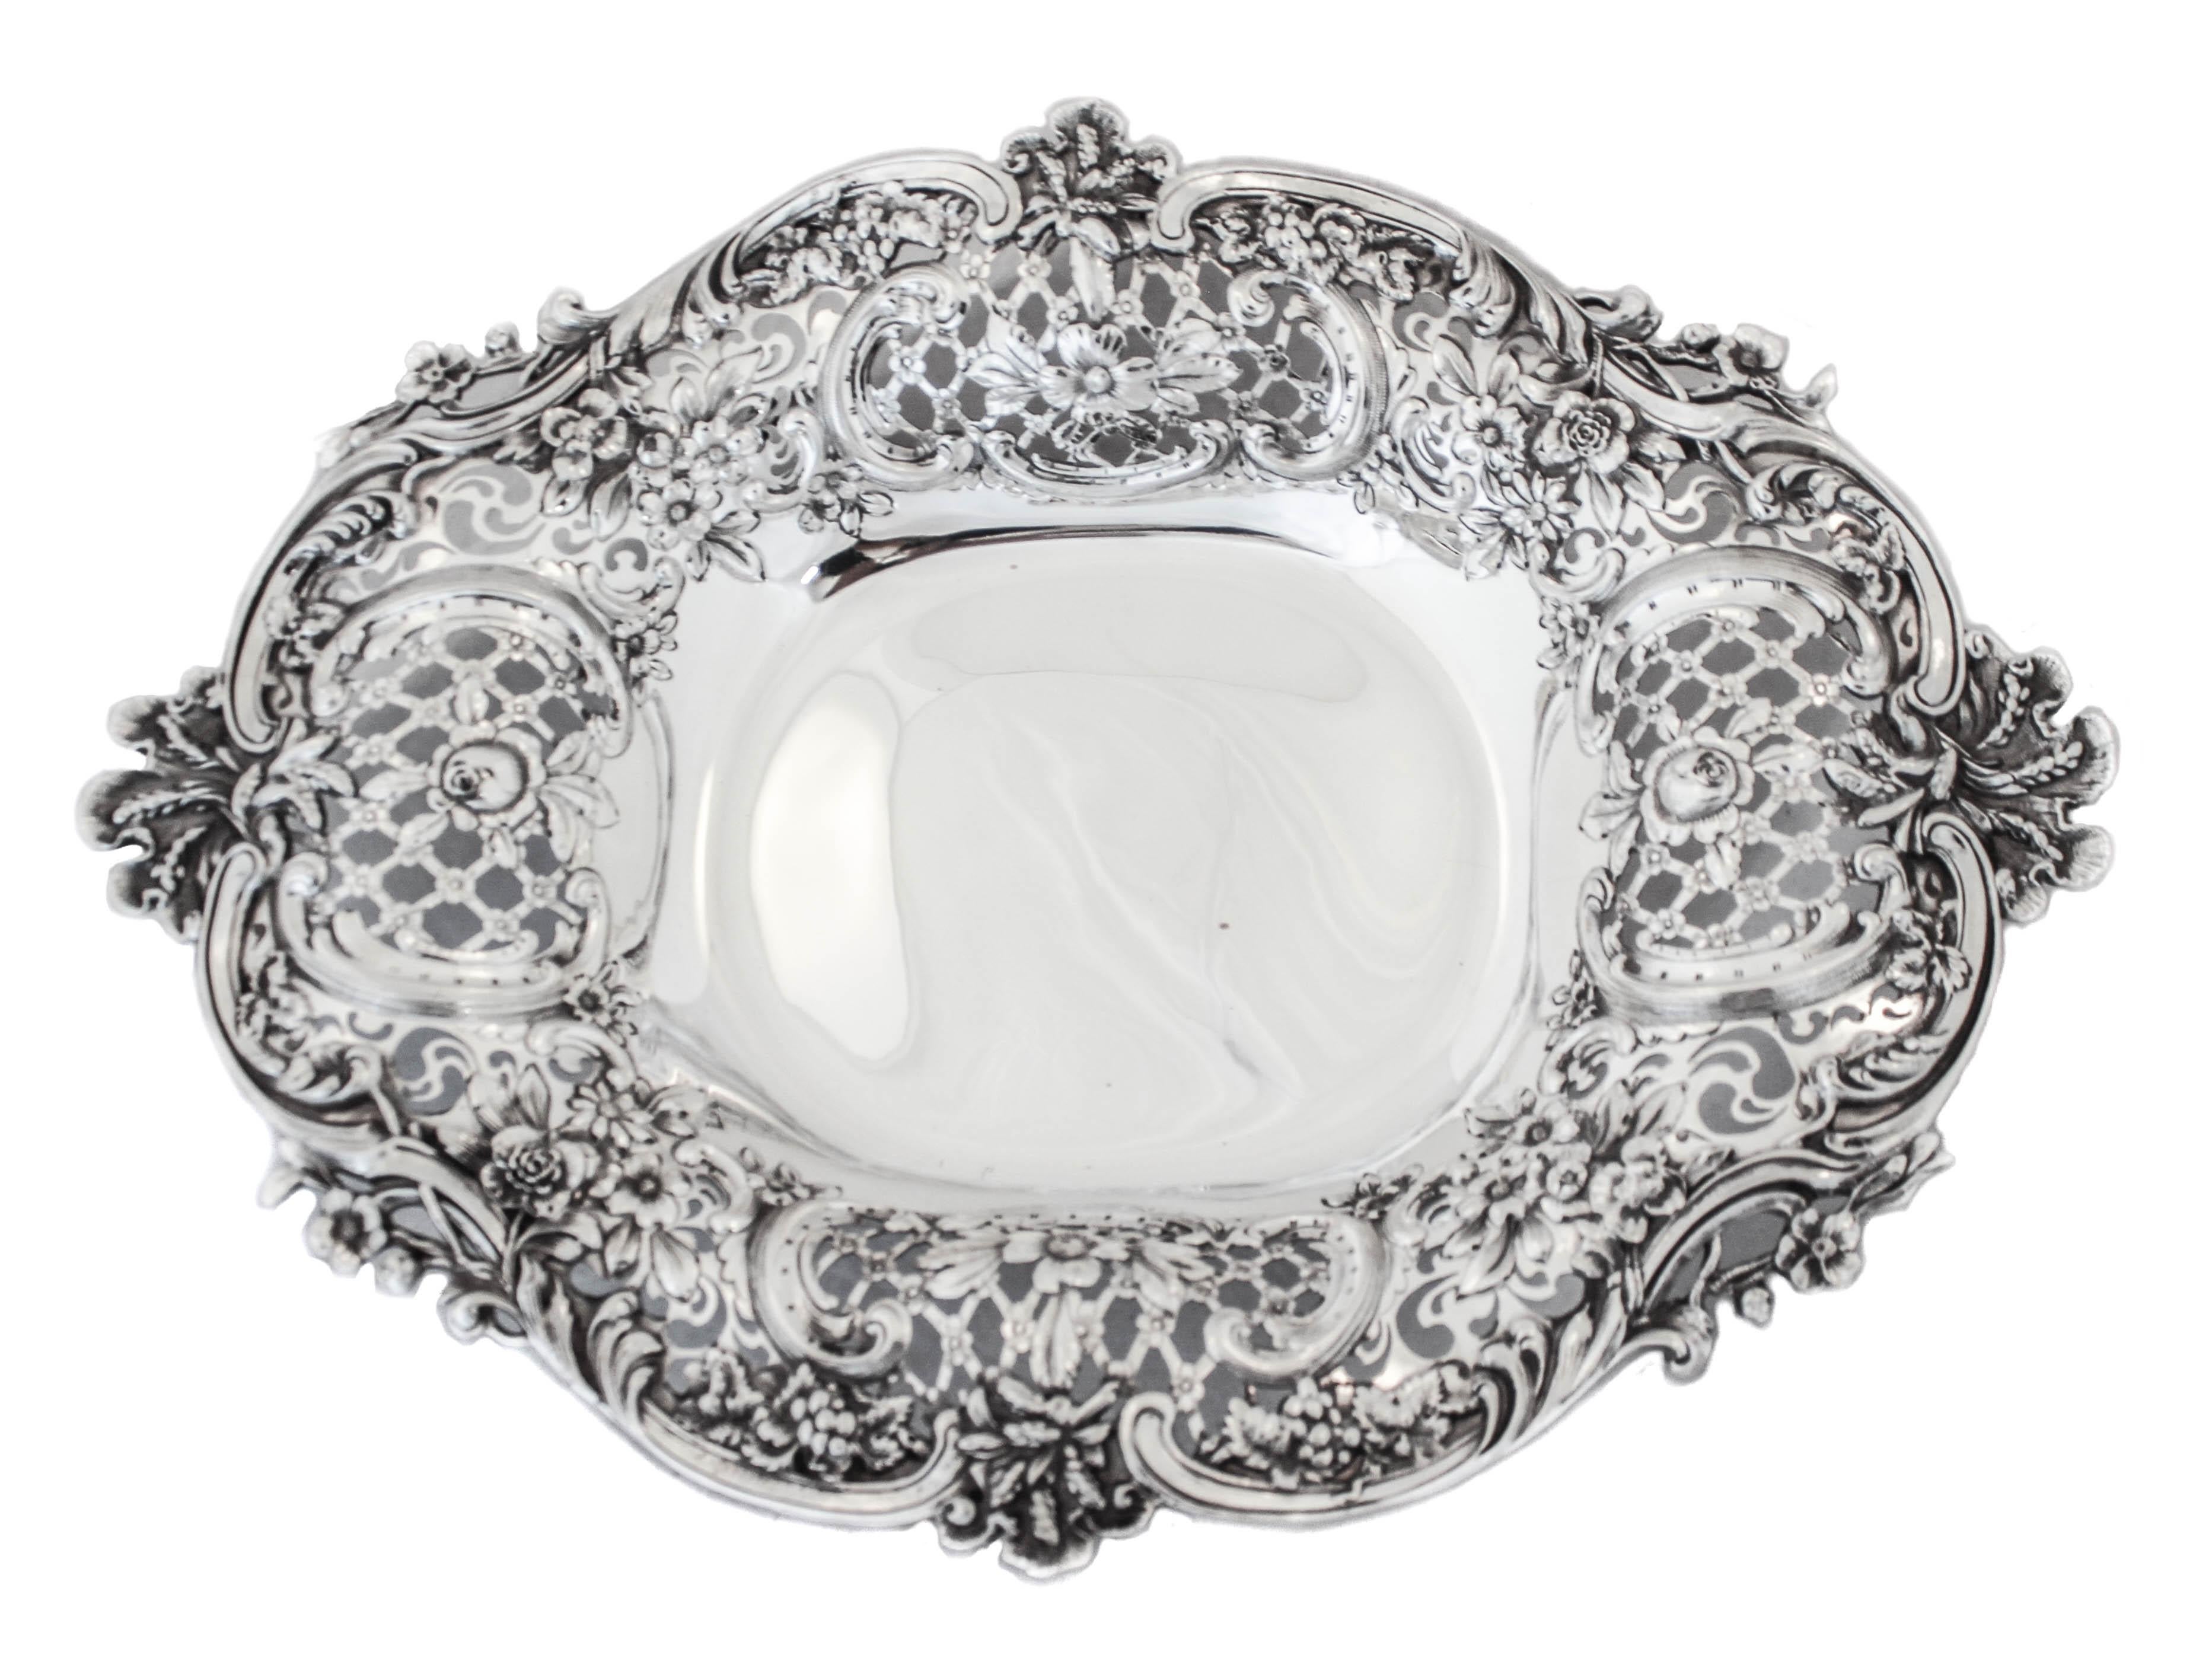 We are honored to offer you this sterling silver Tiffany centerpiece from the late nineteenth century.  Just an exquisite piece of sterling silver hollowware that only Tiffany & Company could design and manufacture.  Standing on four feet this